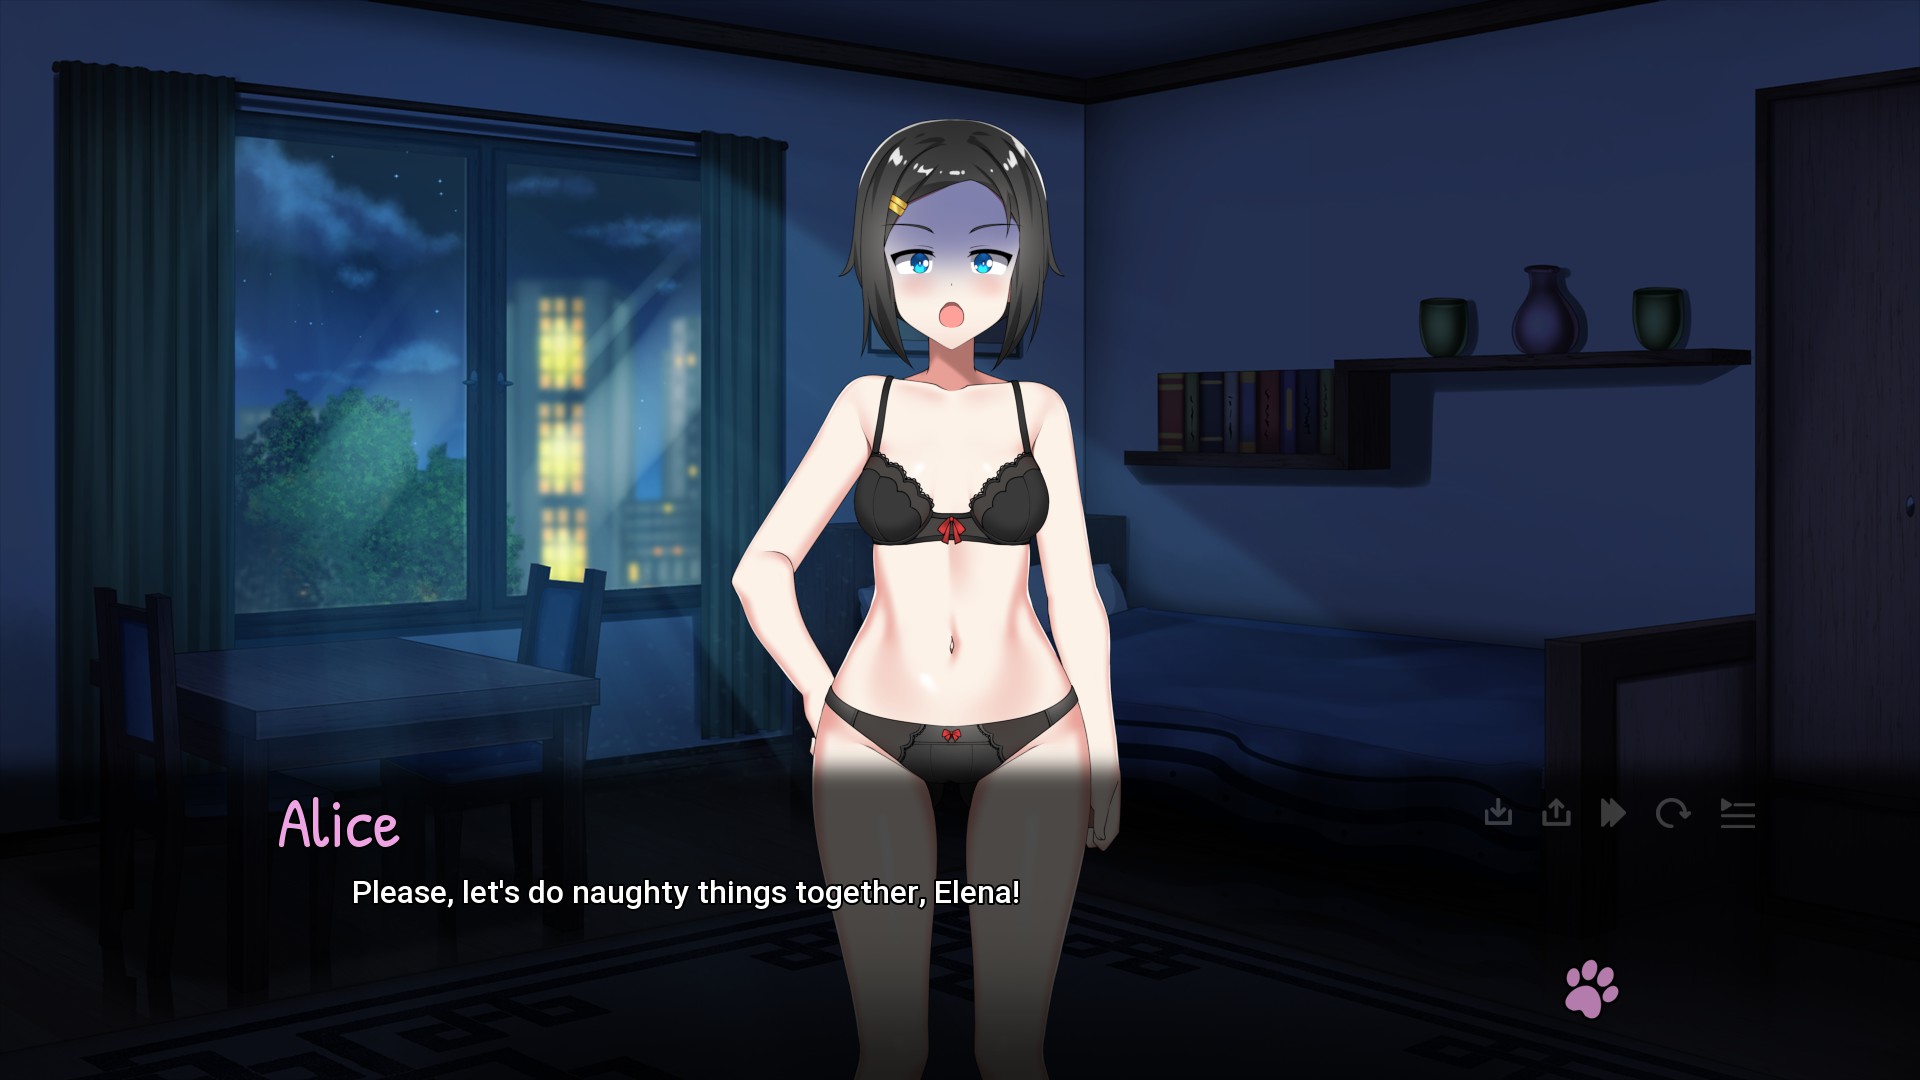 Why Is There A Girl In my House - Lewd